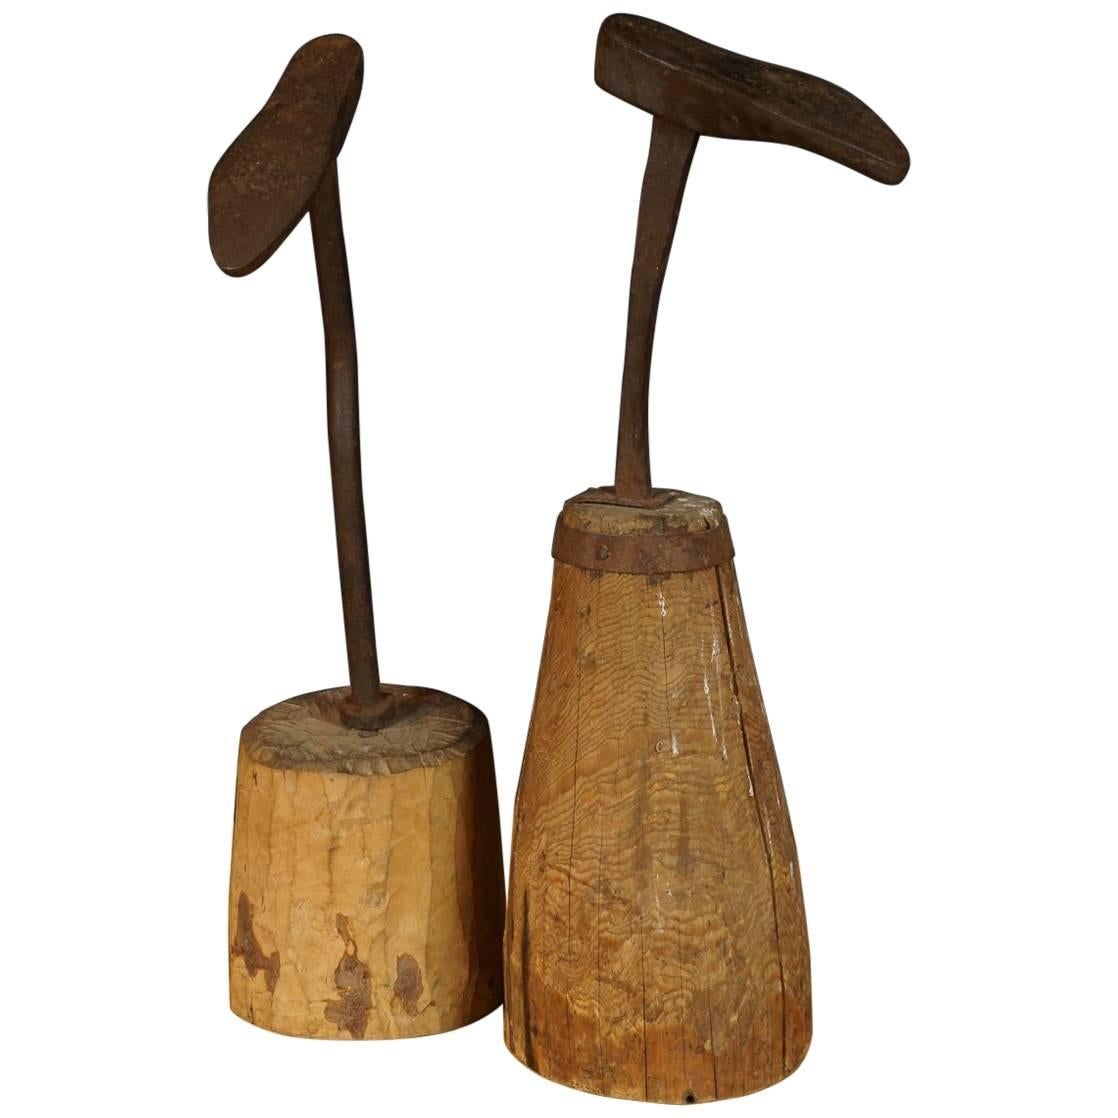 Pair of Cobbler Molds from Sweden, circa 1880